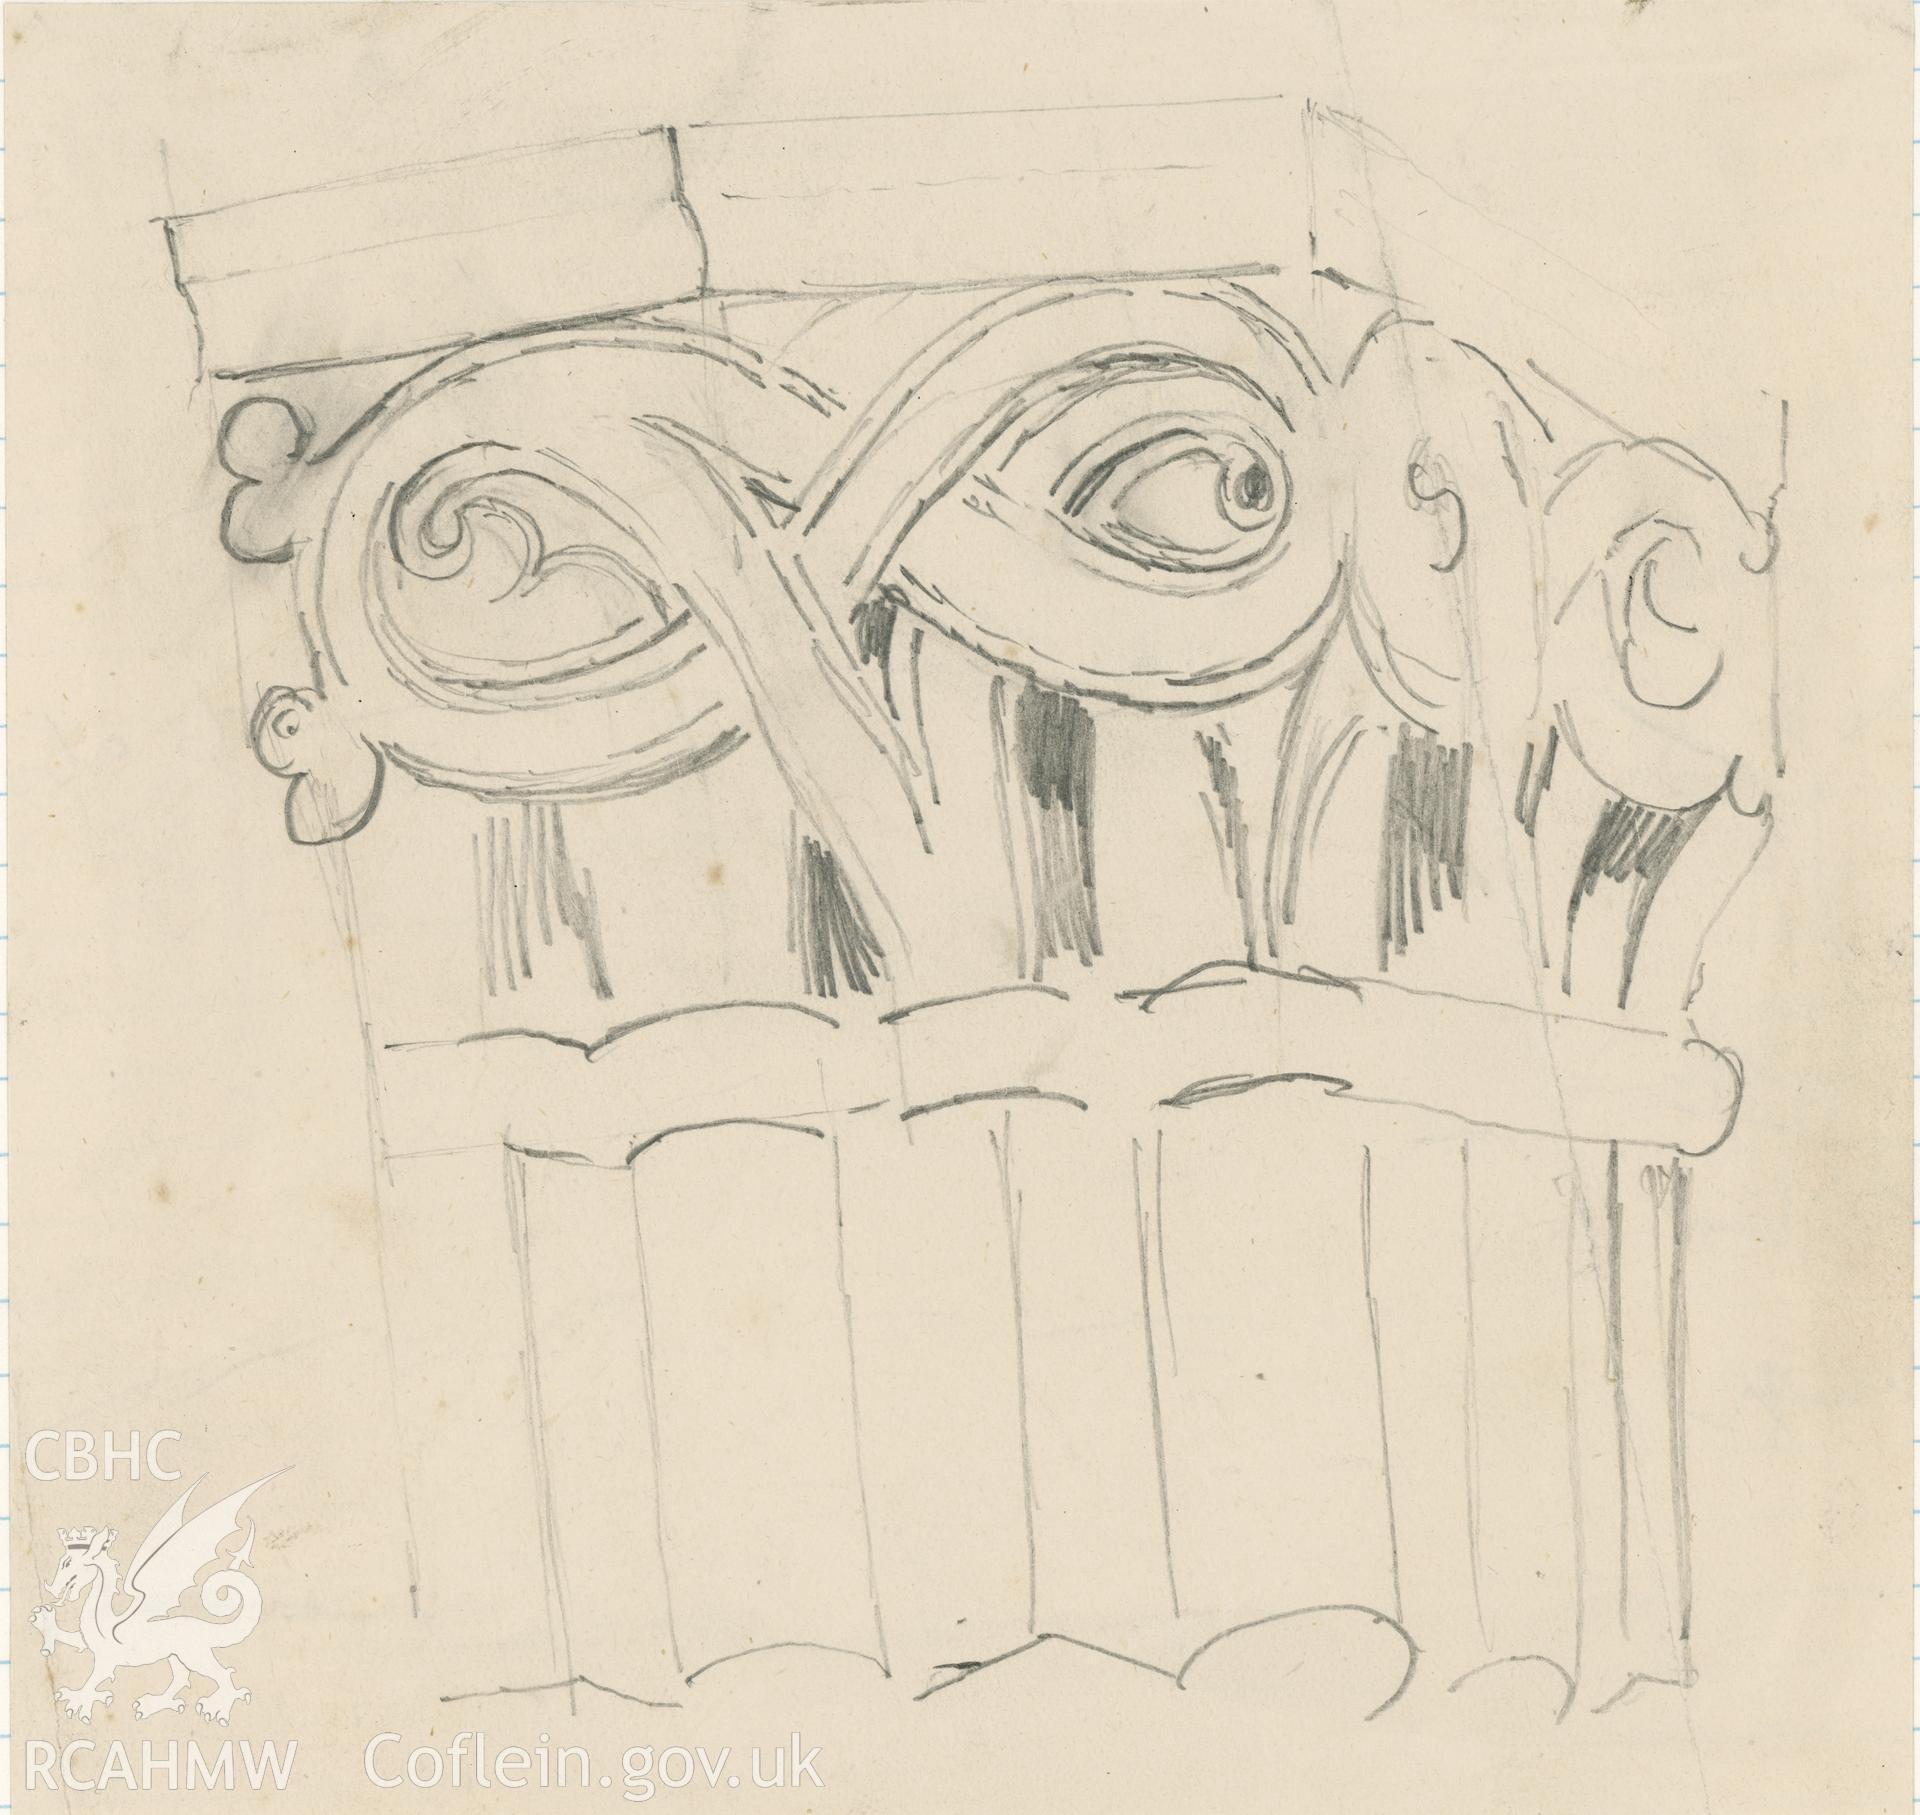 Pencil sketch showing detail of pillars at Valle Crucis Abbey.